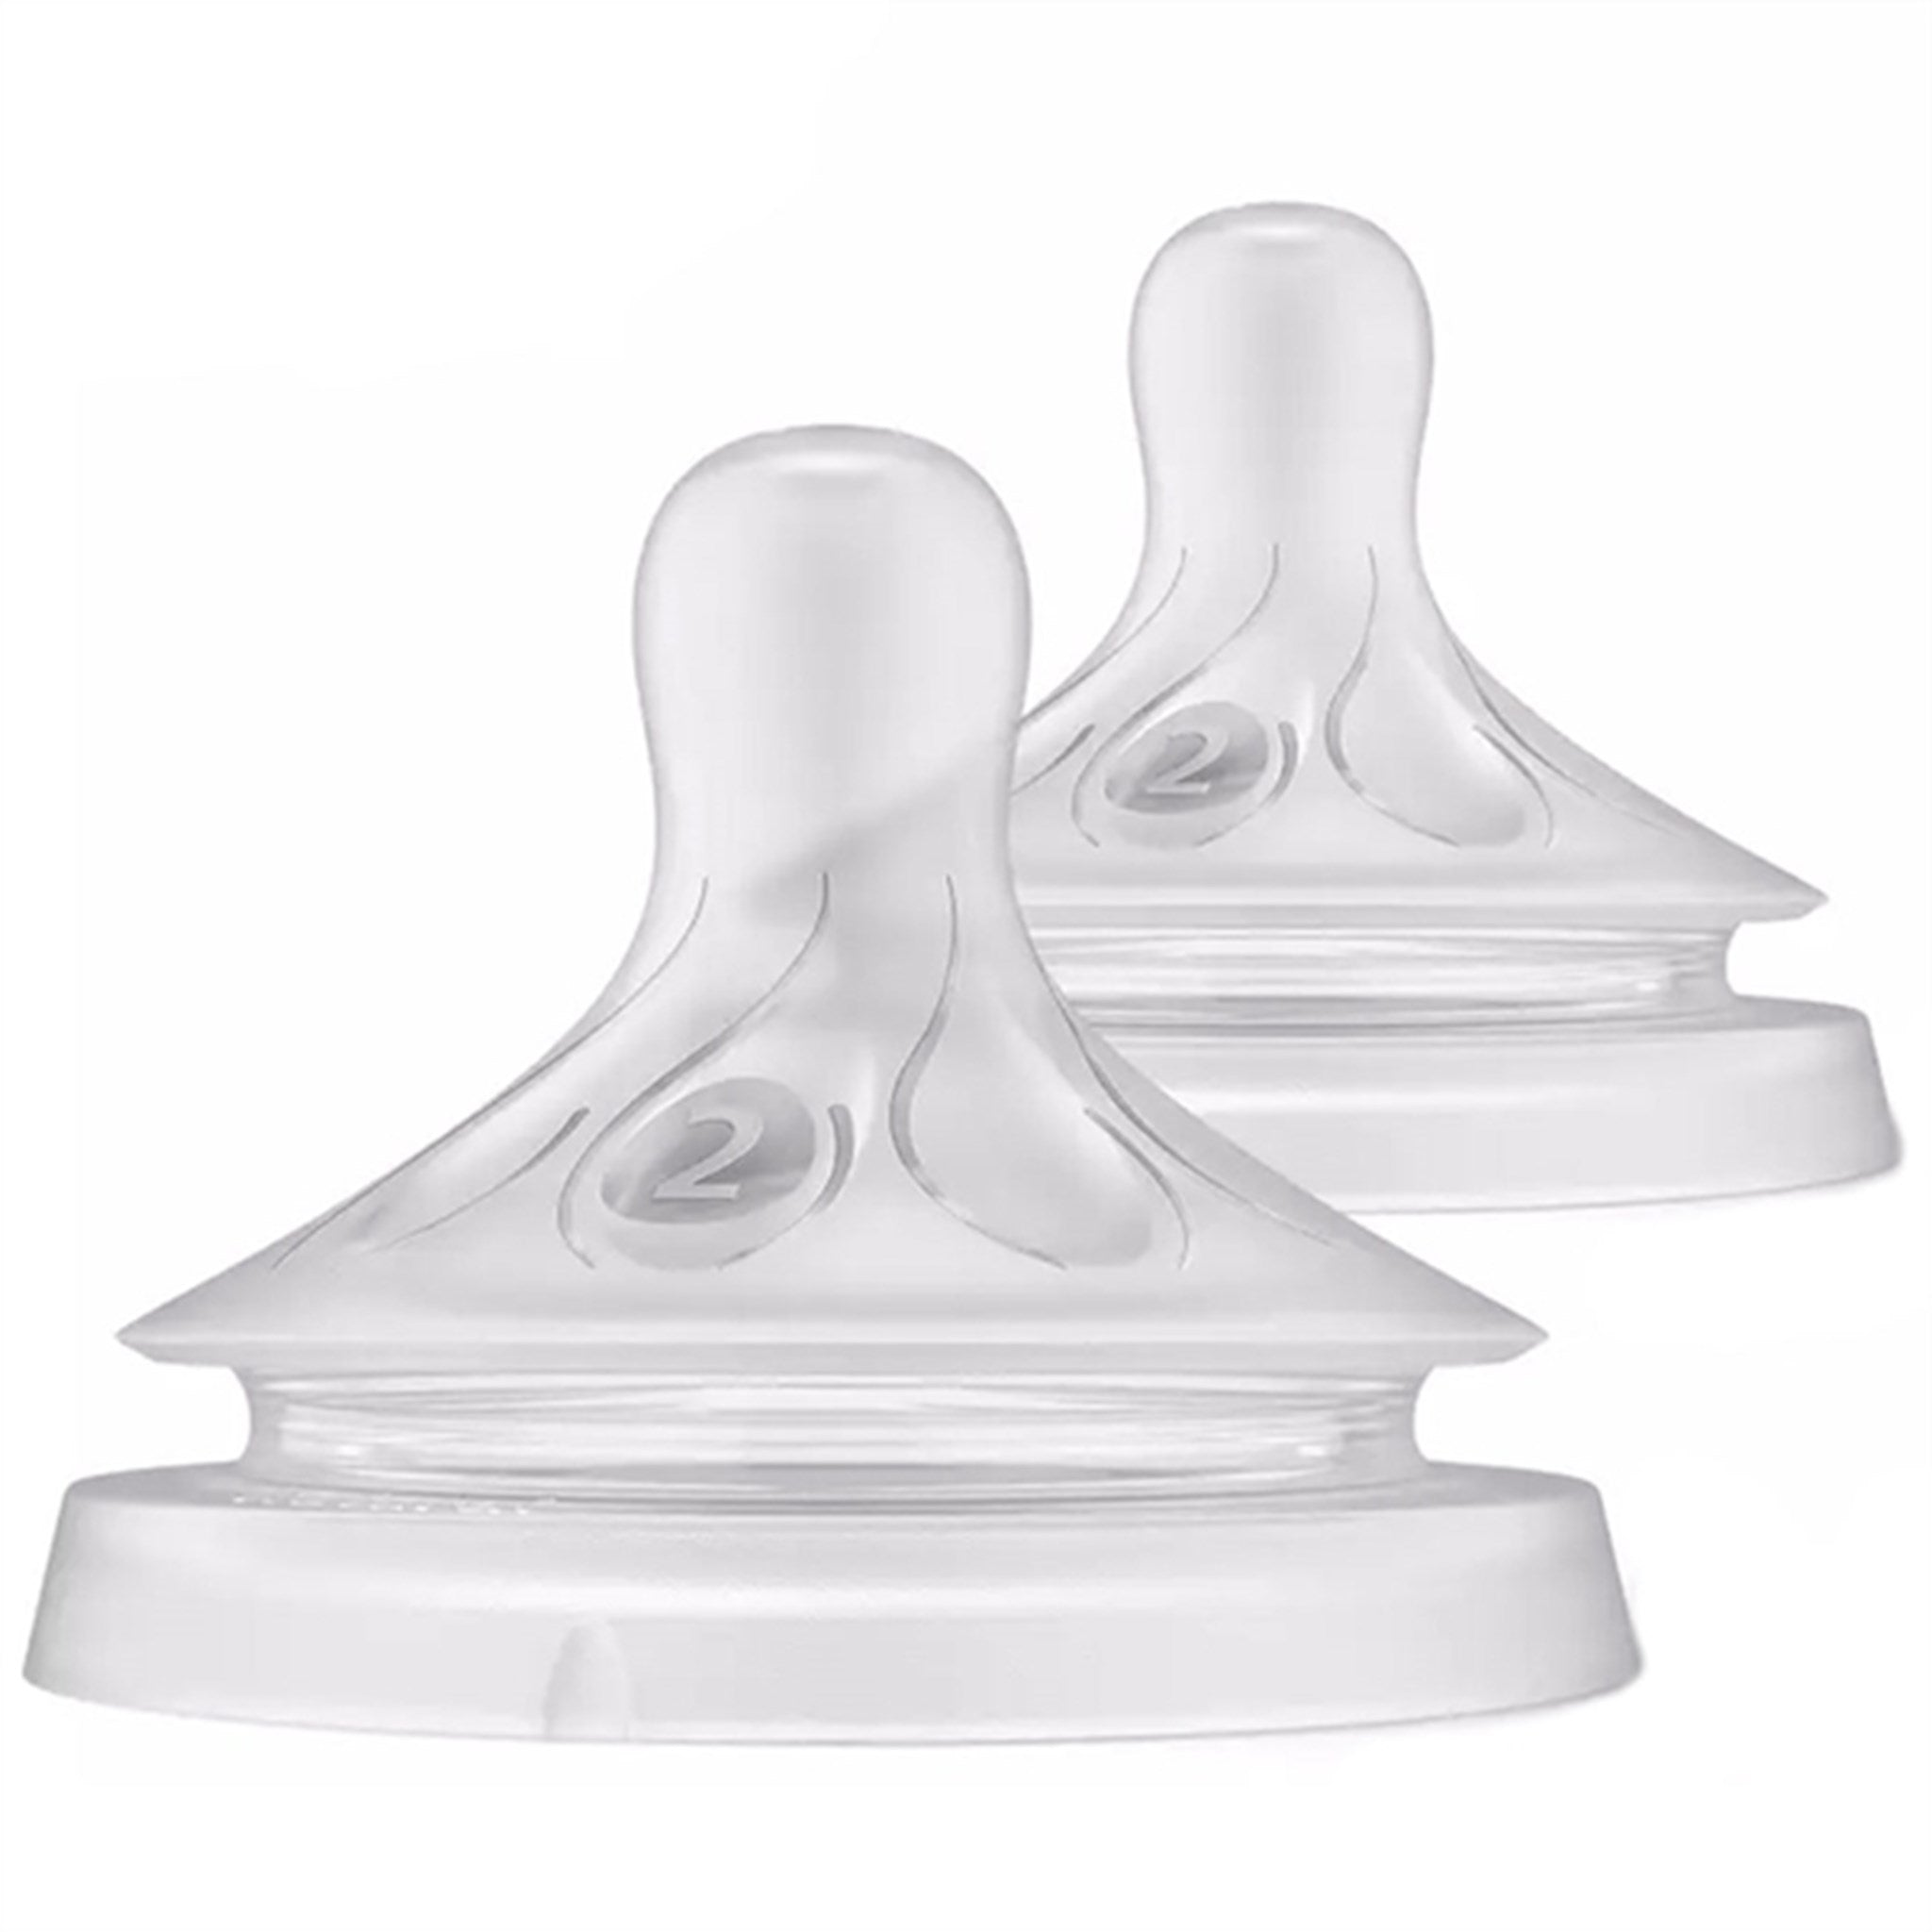 Philips Avent Natural Feeding Bottle Heads Response 0 months 2-pack